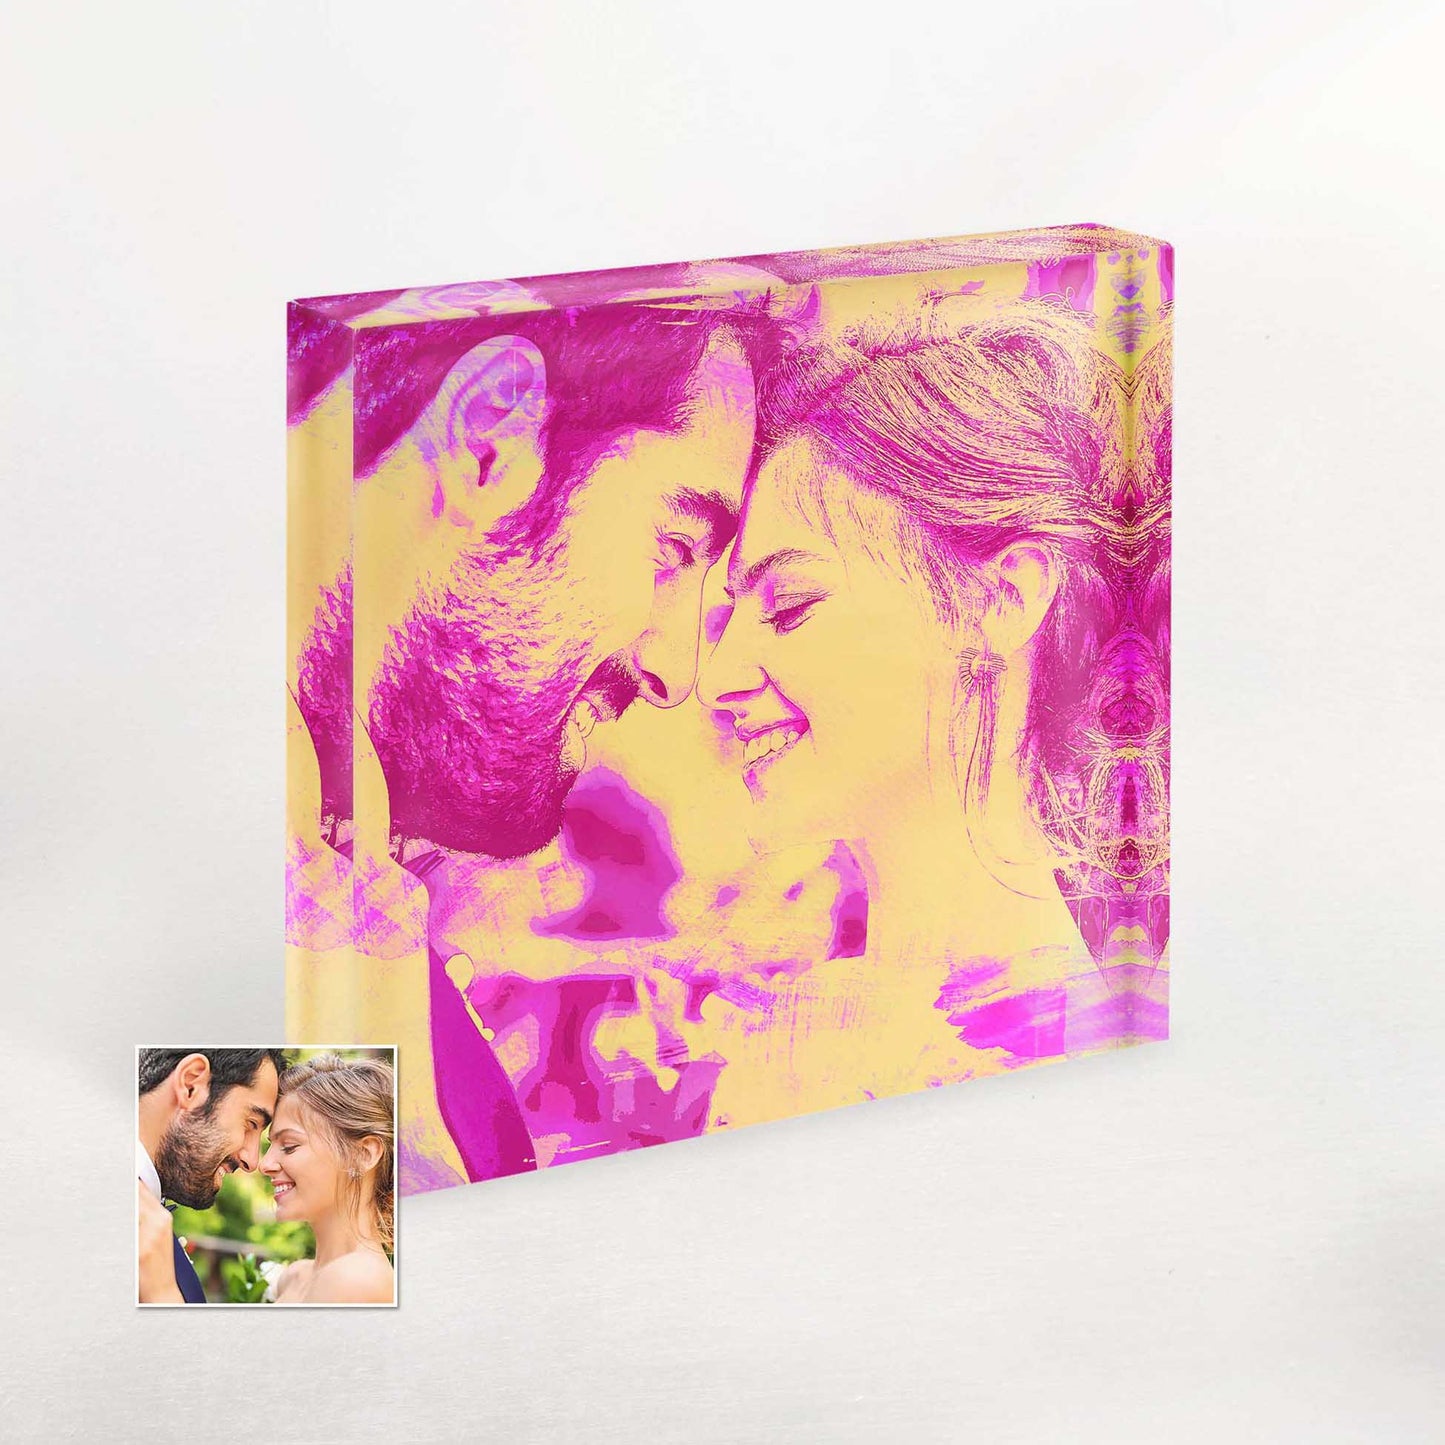 Our Personalised Pink and Yellow Watercolor Acrylic Block Photo is a stunning display of cool and refreshing hues. The vibrant colors create an exciting visual impact, making it a memorable gift idea for anniversaries or birthdays.